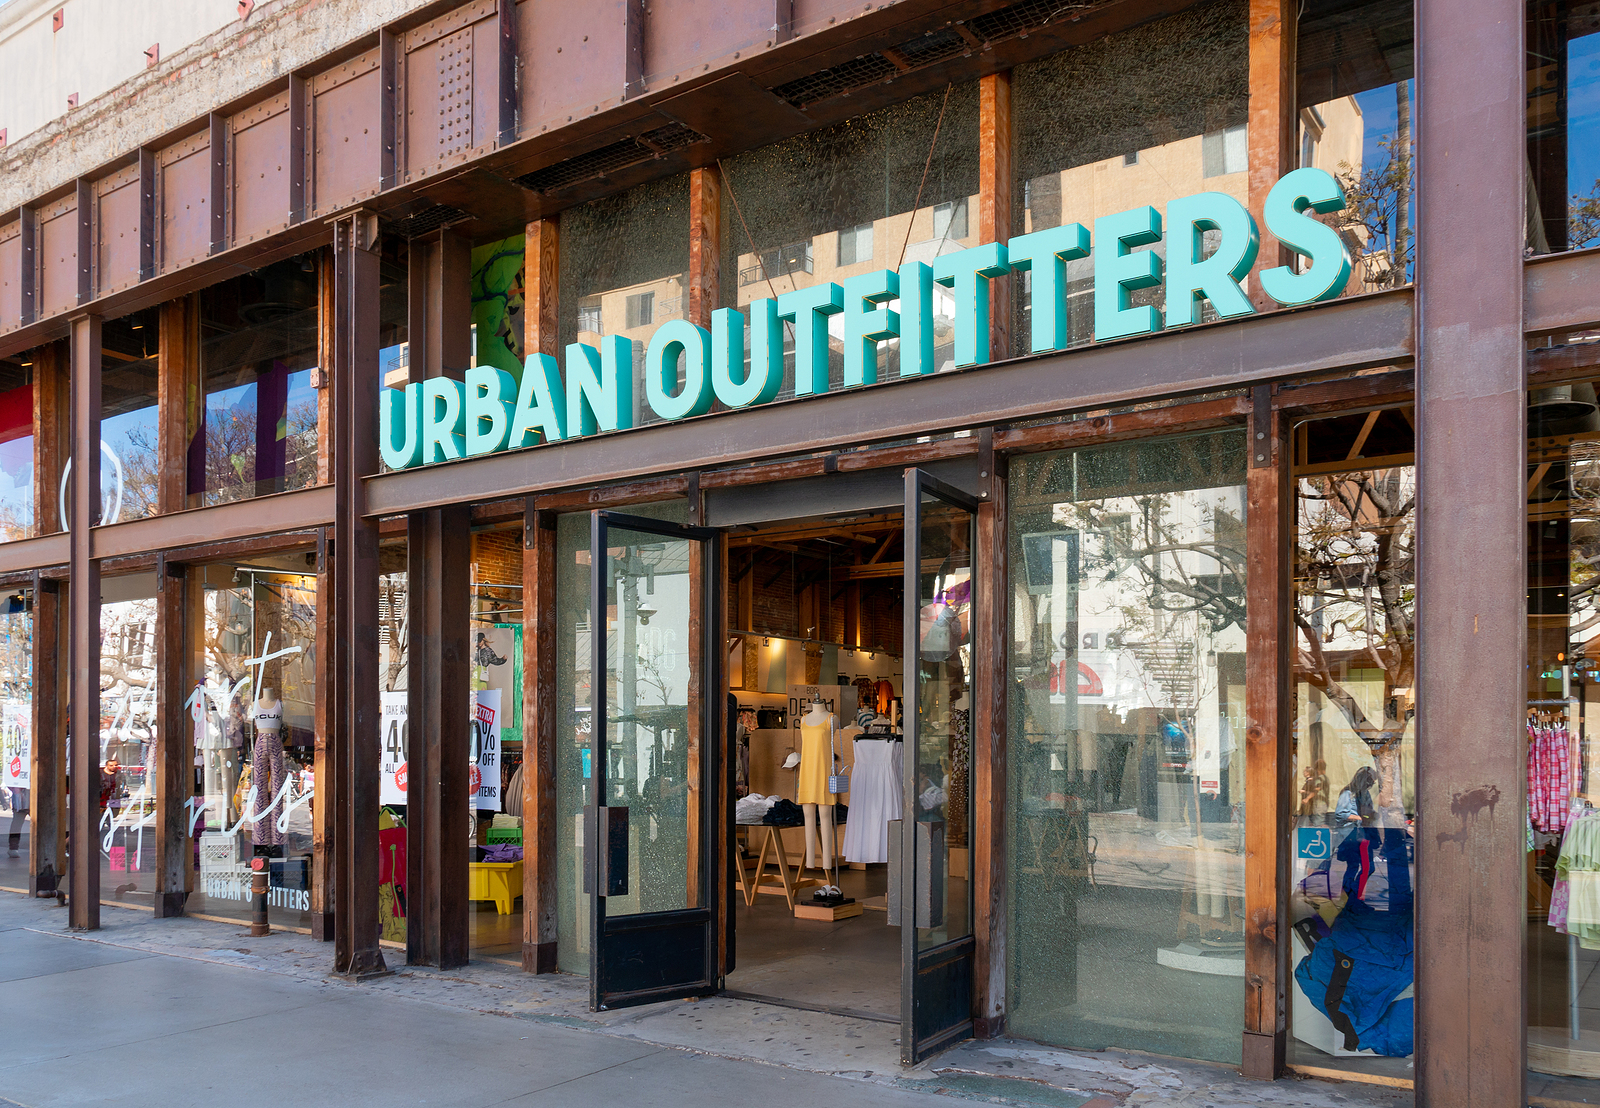 Urban Outfitters URBN stock news and analysis